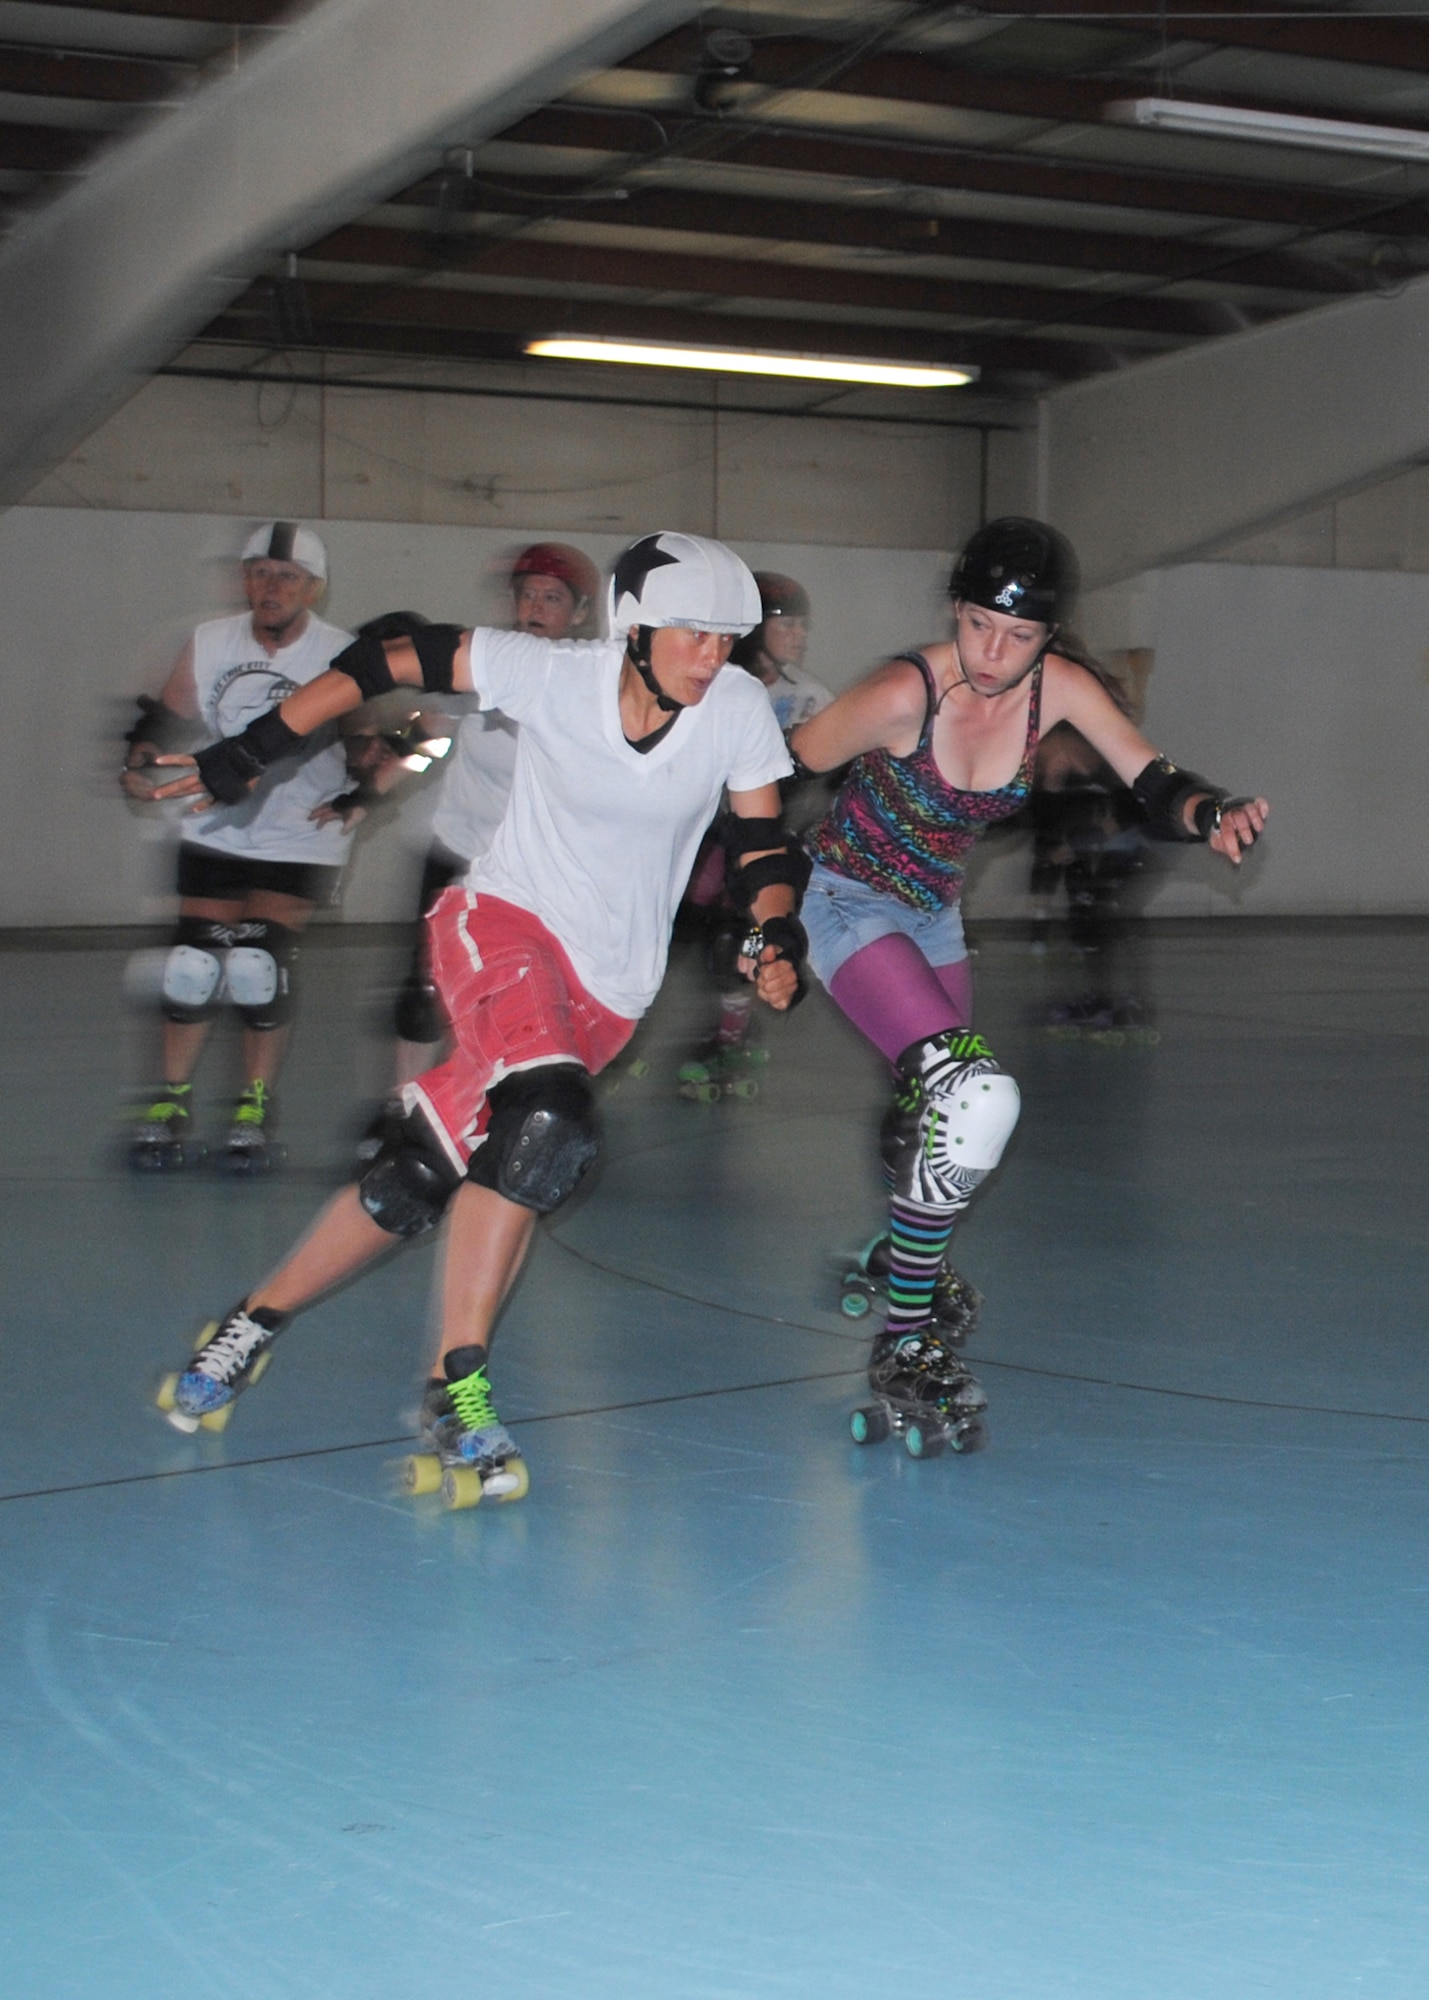 Capt. Cindy Tope, 40th Helicopter Squadron UH-1N pilot, left, tries to lap other Electric City Roller GrrrlZ members as she plays the role of a jammer during a practice at Hauers Family Skating Center on June 24. The team focuses on the basics of skating, fitness, drills and practice scrimmages in preparation for each bout. (U.S. Air Force photo/Airman 1st Class Katrina Heikkinen)